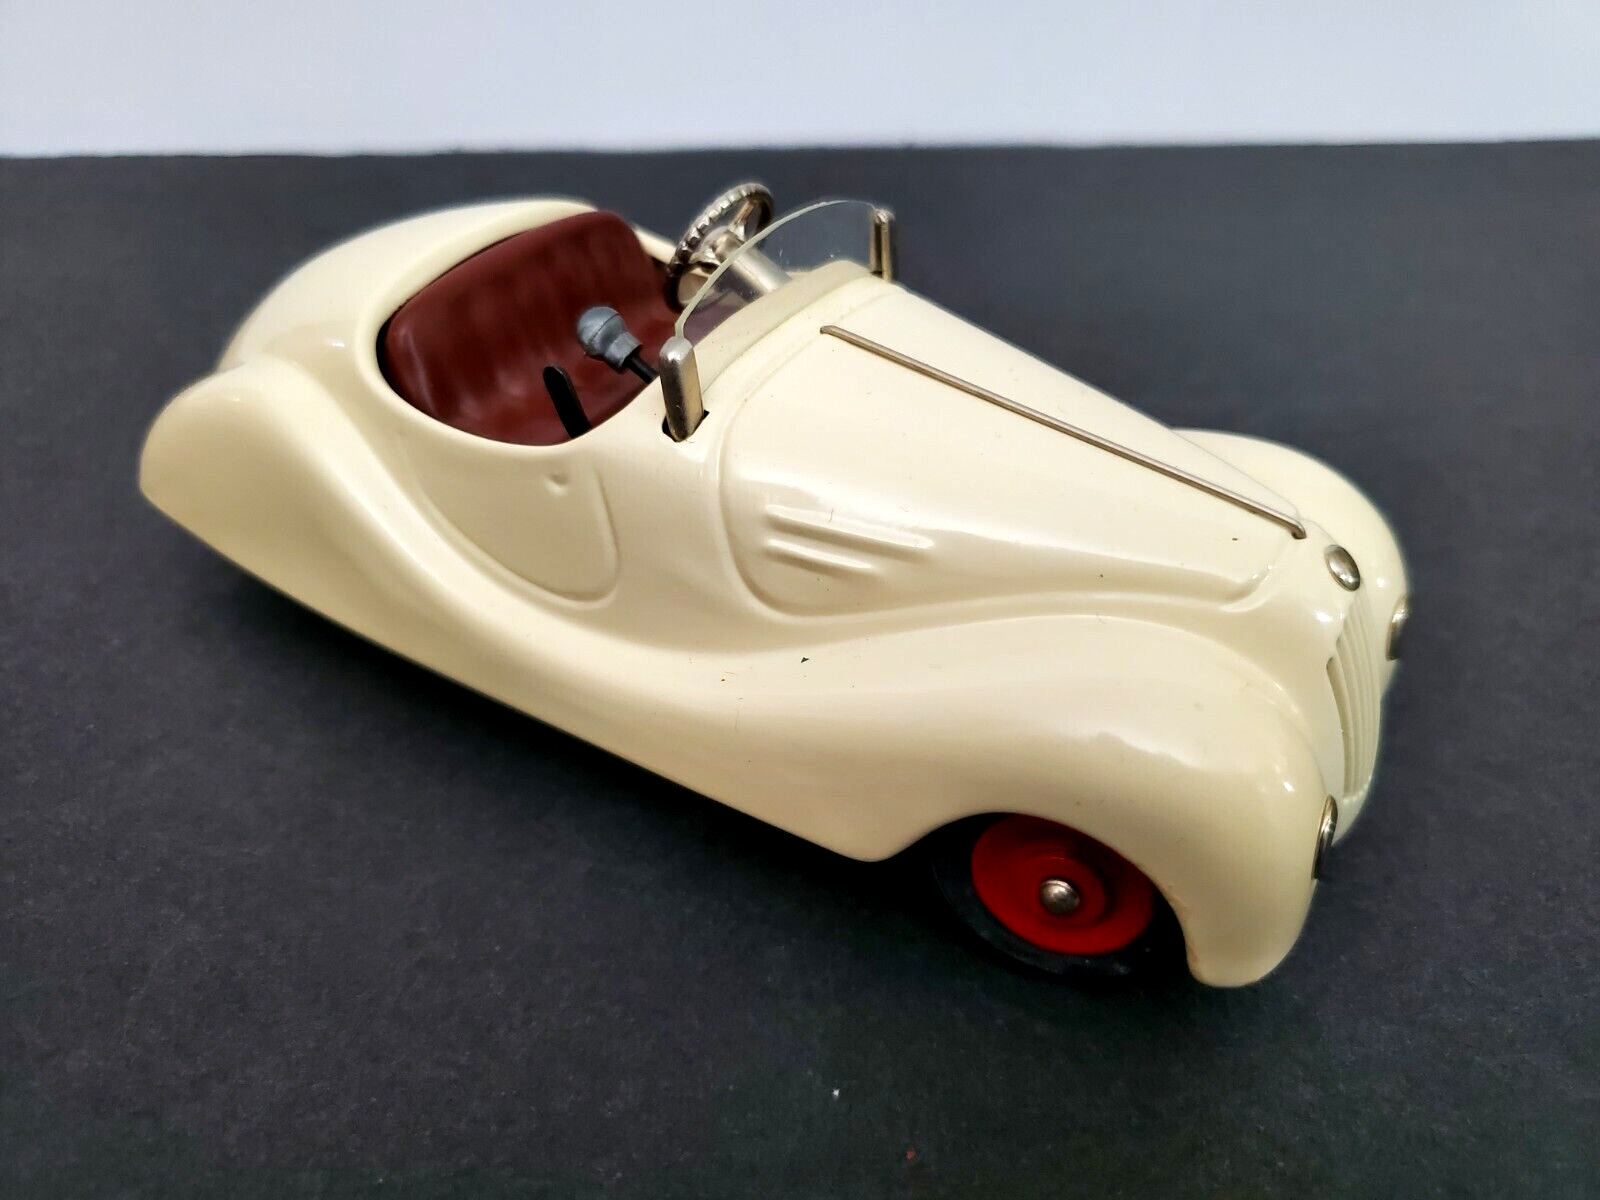 Vintage Schuco Examico 4001 wind-up toy white roadster from West Germany